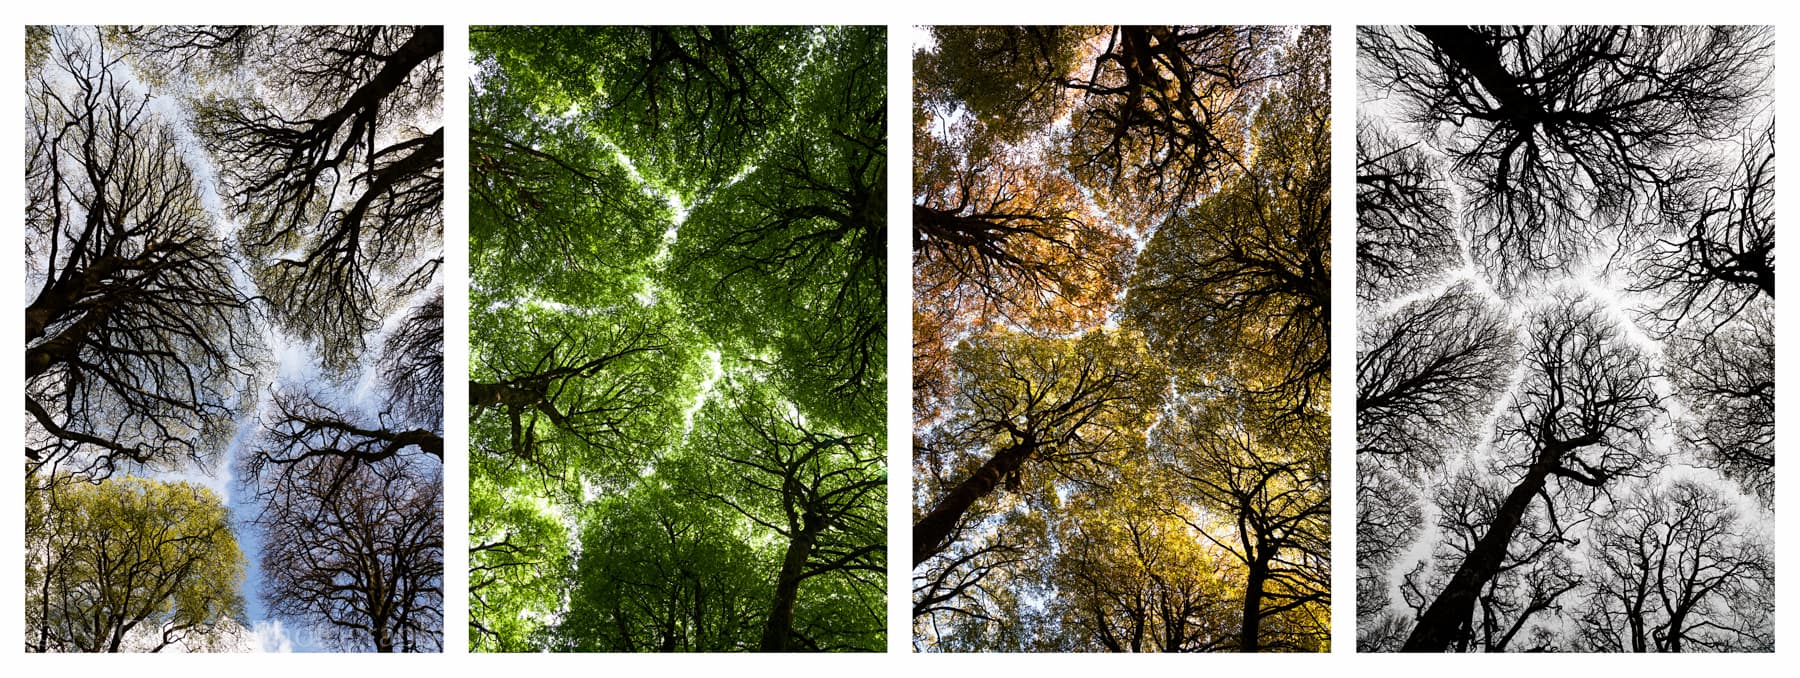 Photos of four seasons of crown shyness trees